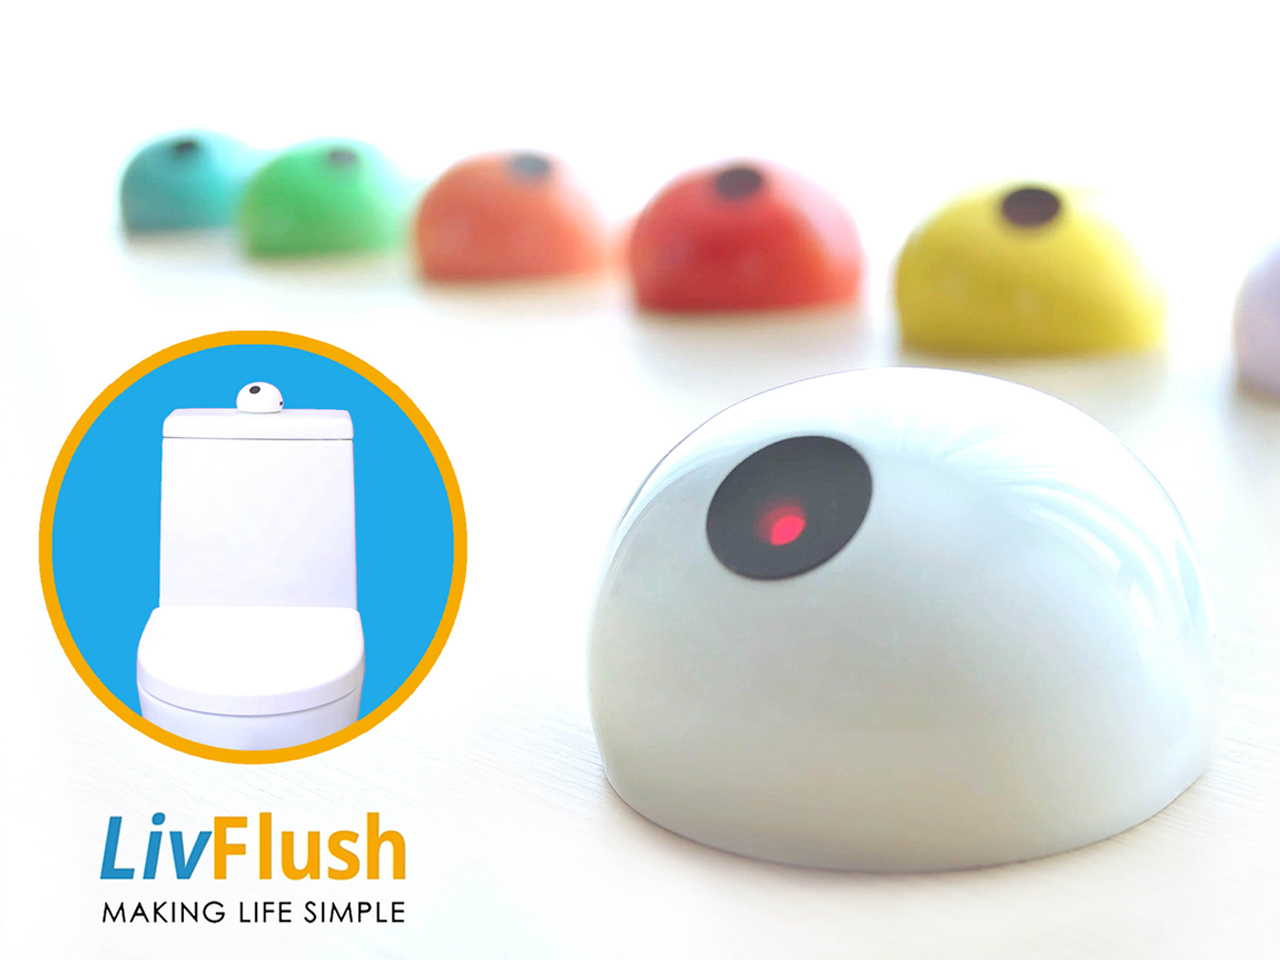 LivFlush Launches the World's First Add-On Touchless Home-Use Toilet Flush Sensor